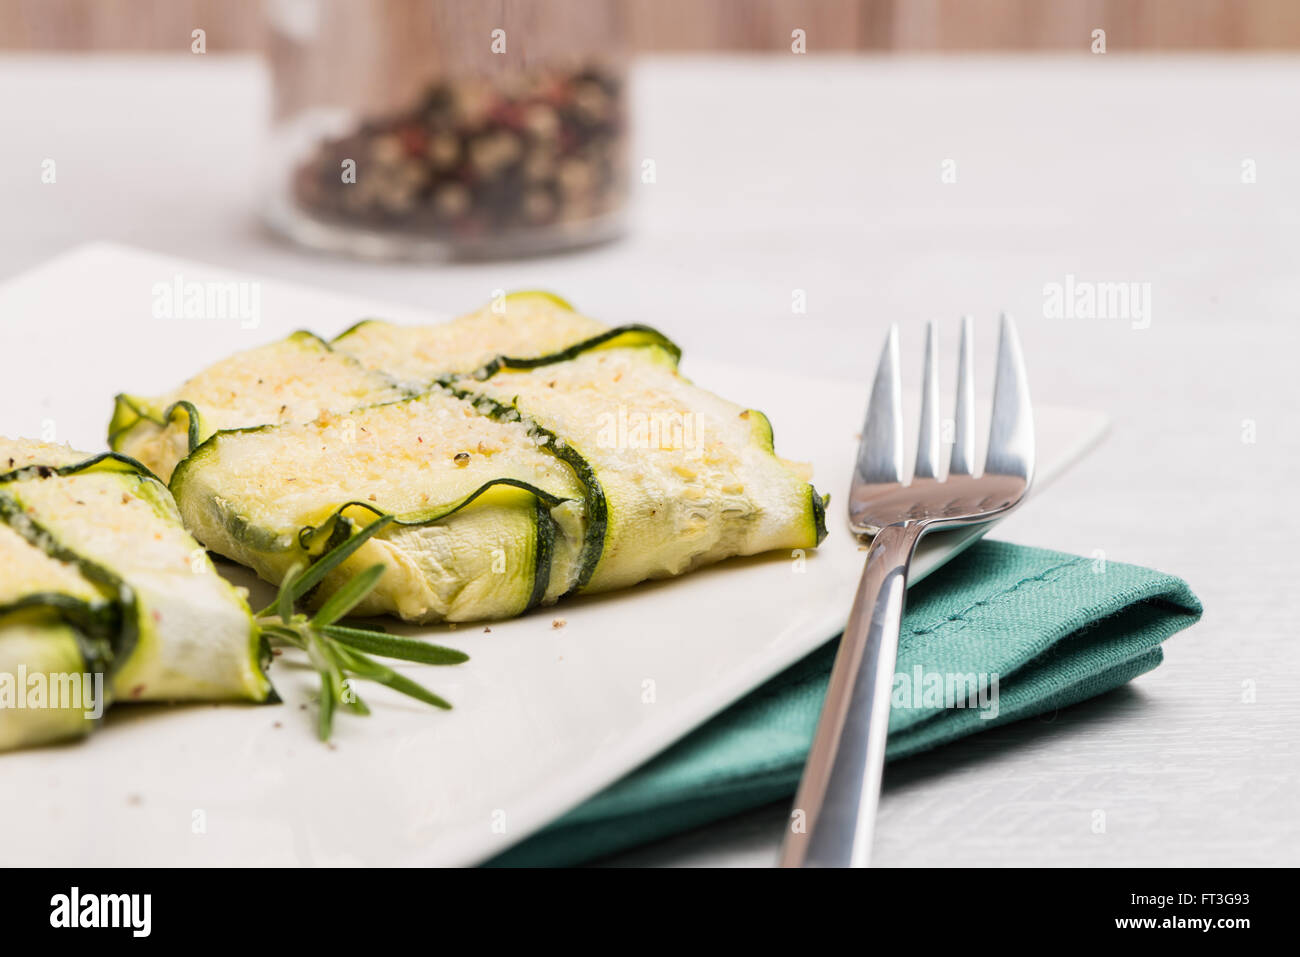 Interlaced courgettes or zucchini slices and meat with grated cheese ready to be eaten Stock Photo